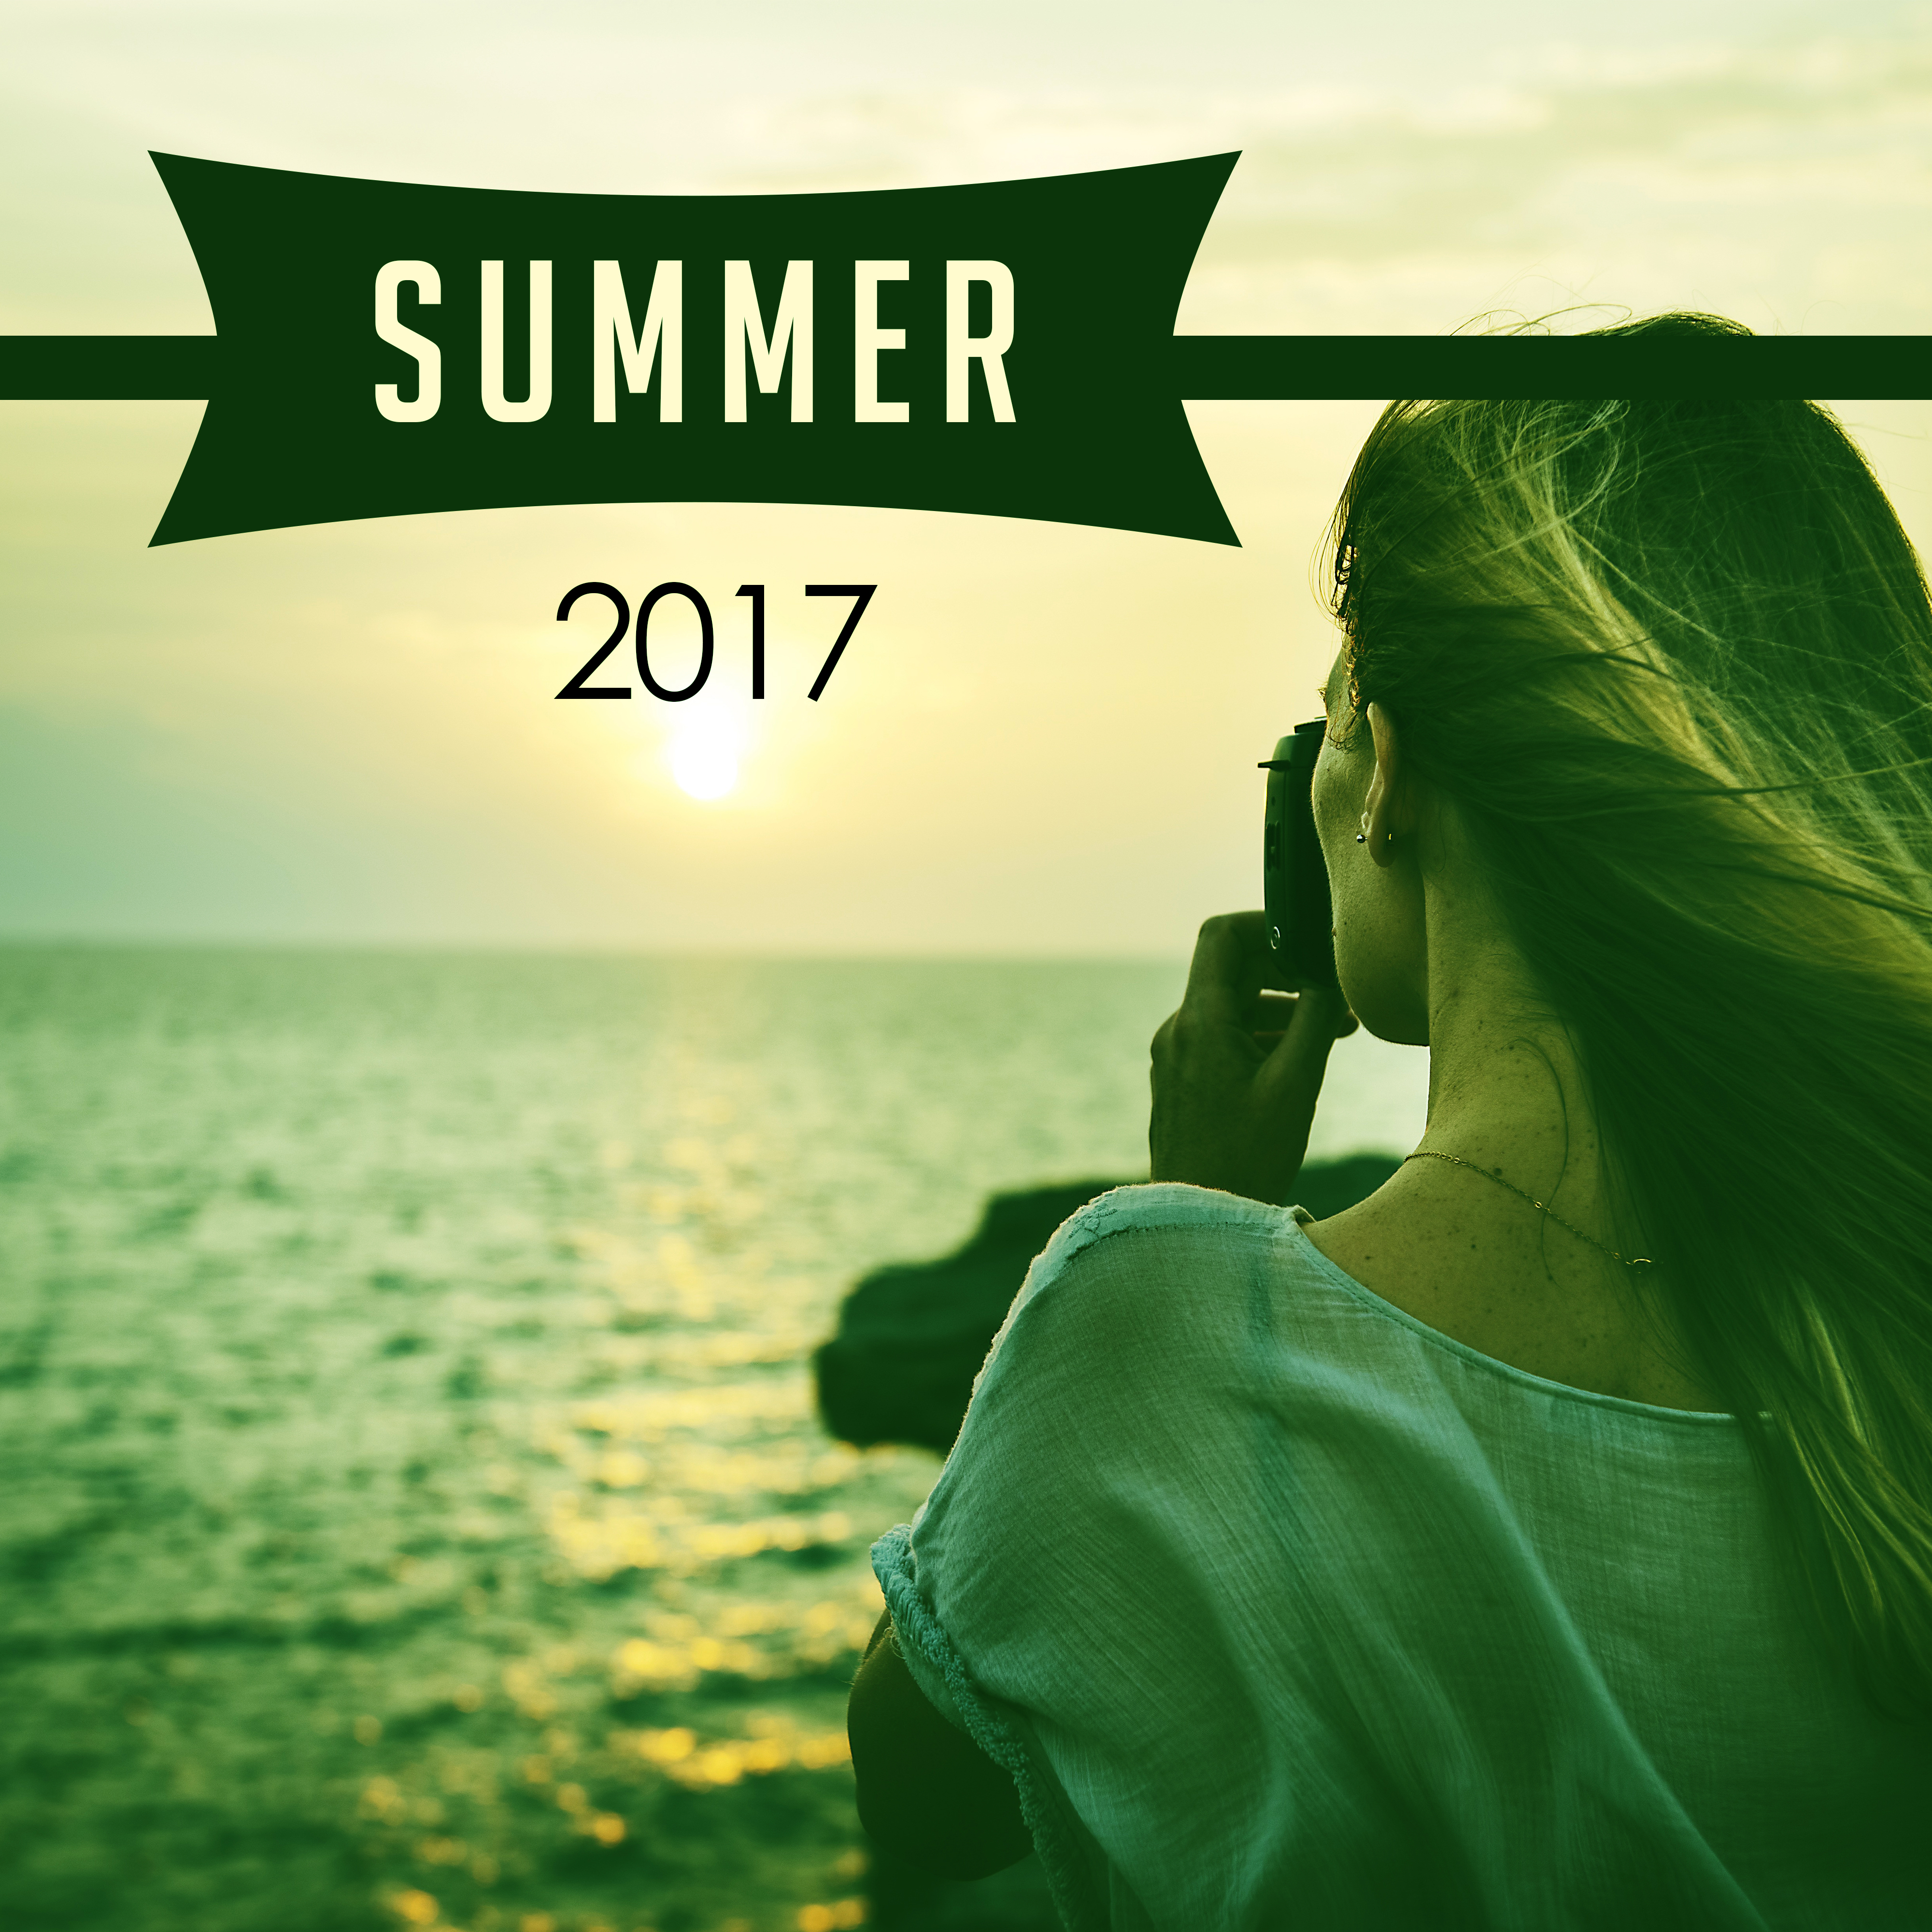 Summer 2017 – Beach Chill, Relaxing Therapy, Cocktails & Drinks Under Palms, Summertime, Holiday Song